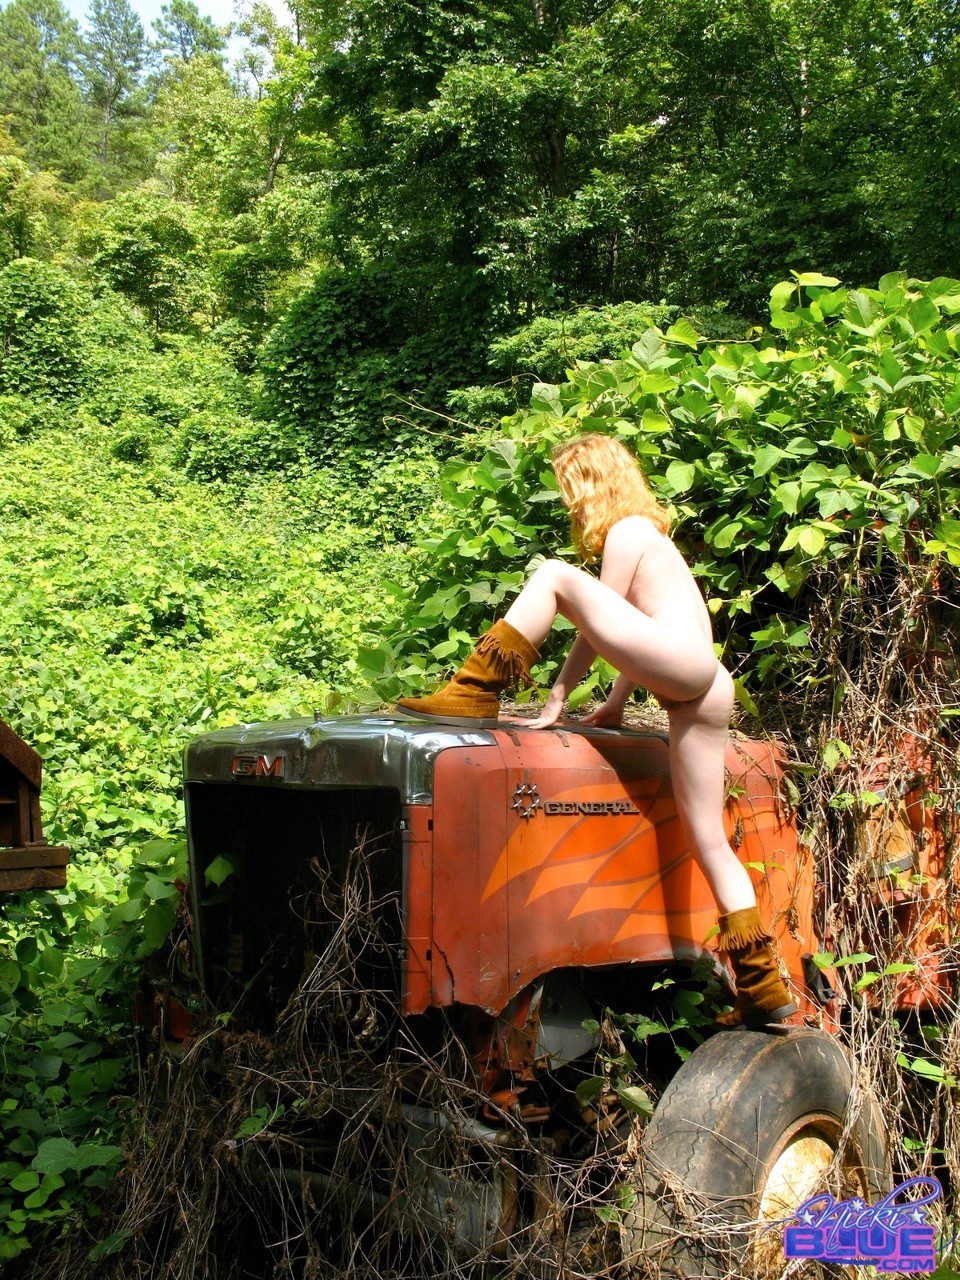 Amateur babe in boots Nicki Blue strips and poses on a tractor in the forest 포르노 사진 #424040516 | Pornstar Platinum Pics, Nicki Blue, Outdoor, 모바일 포르노